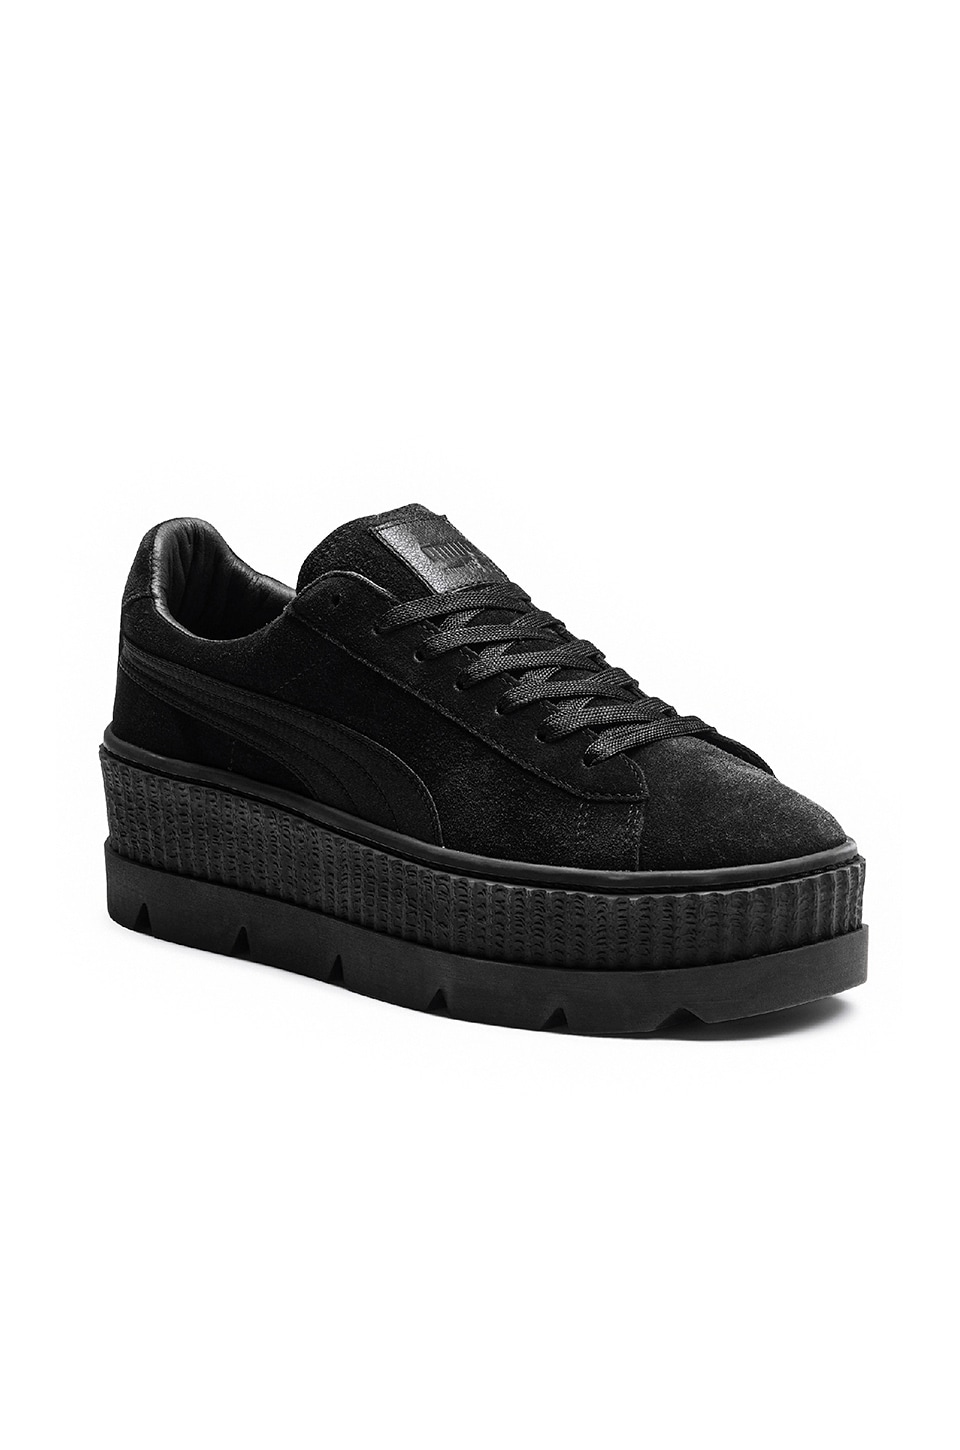 puma creepers afterpay